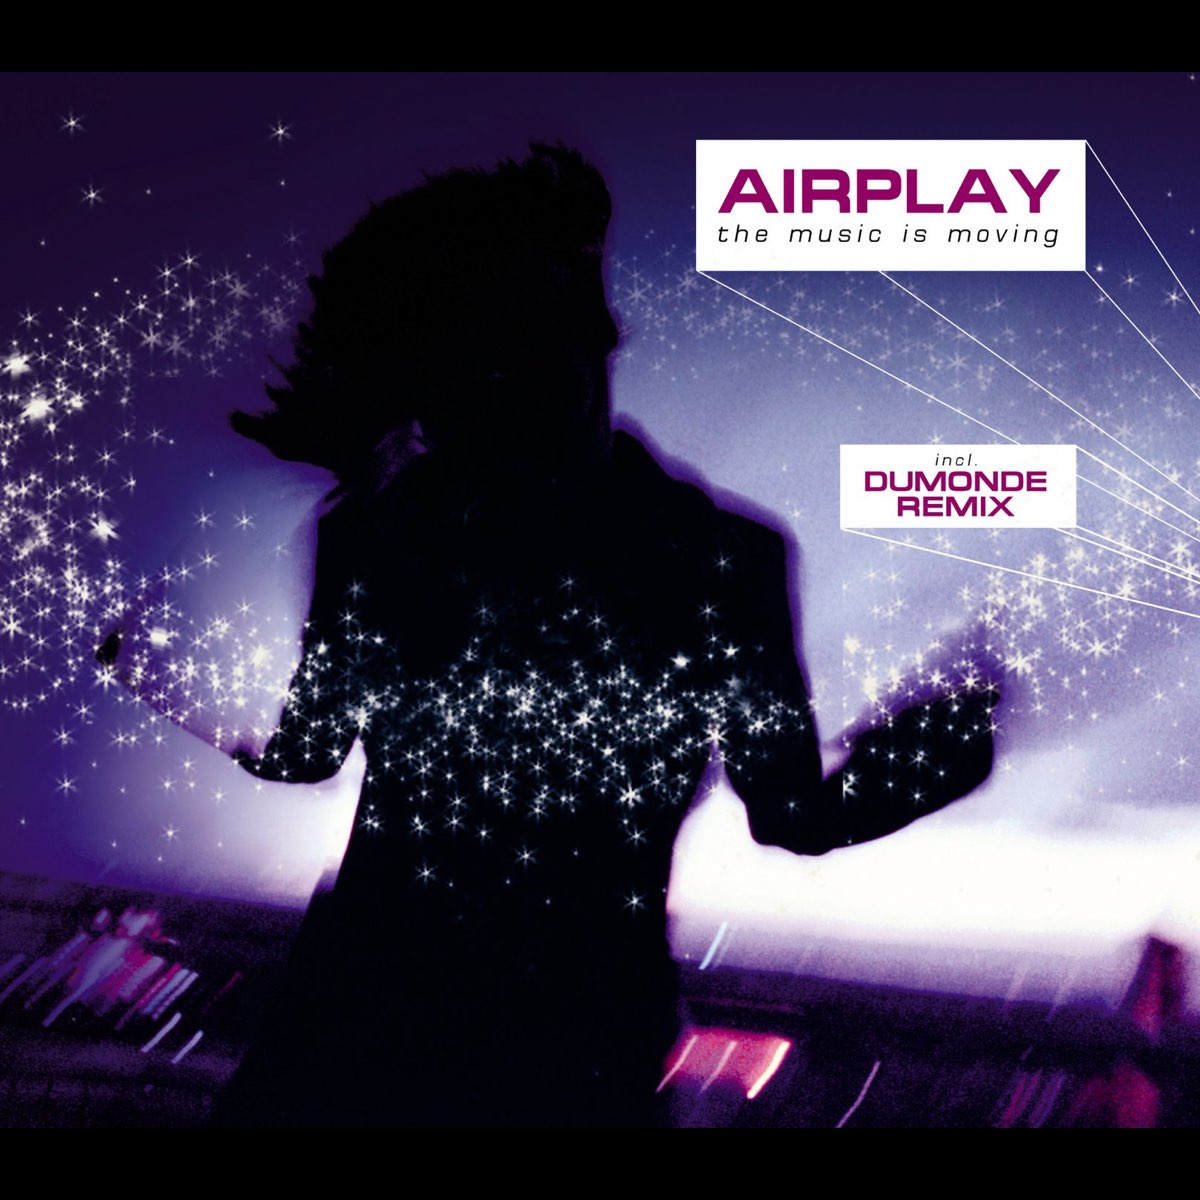 Airplay the Music is moving. Airplay - for your Love. The Music is New. GDNR музыка из.